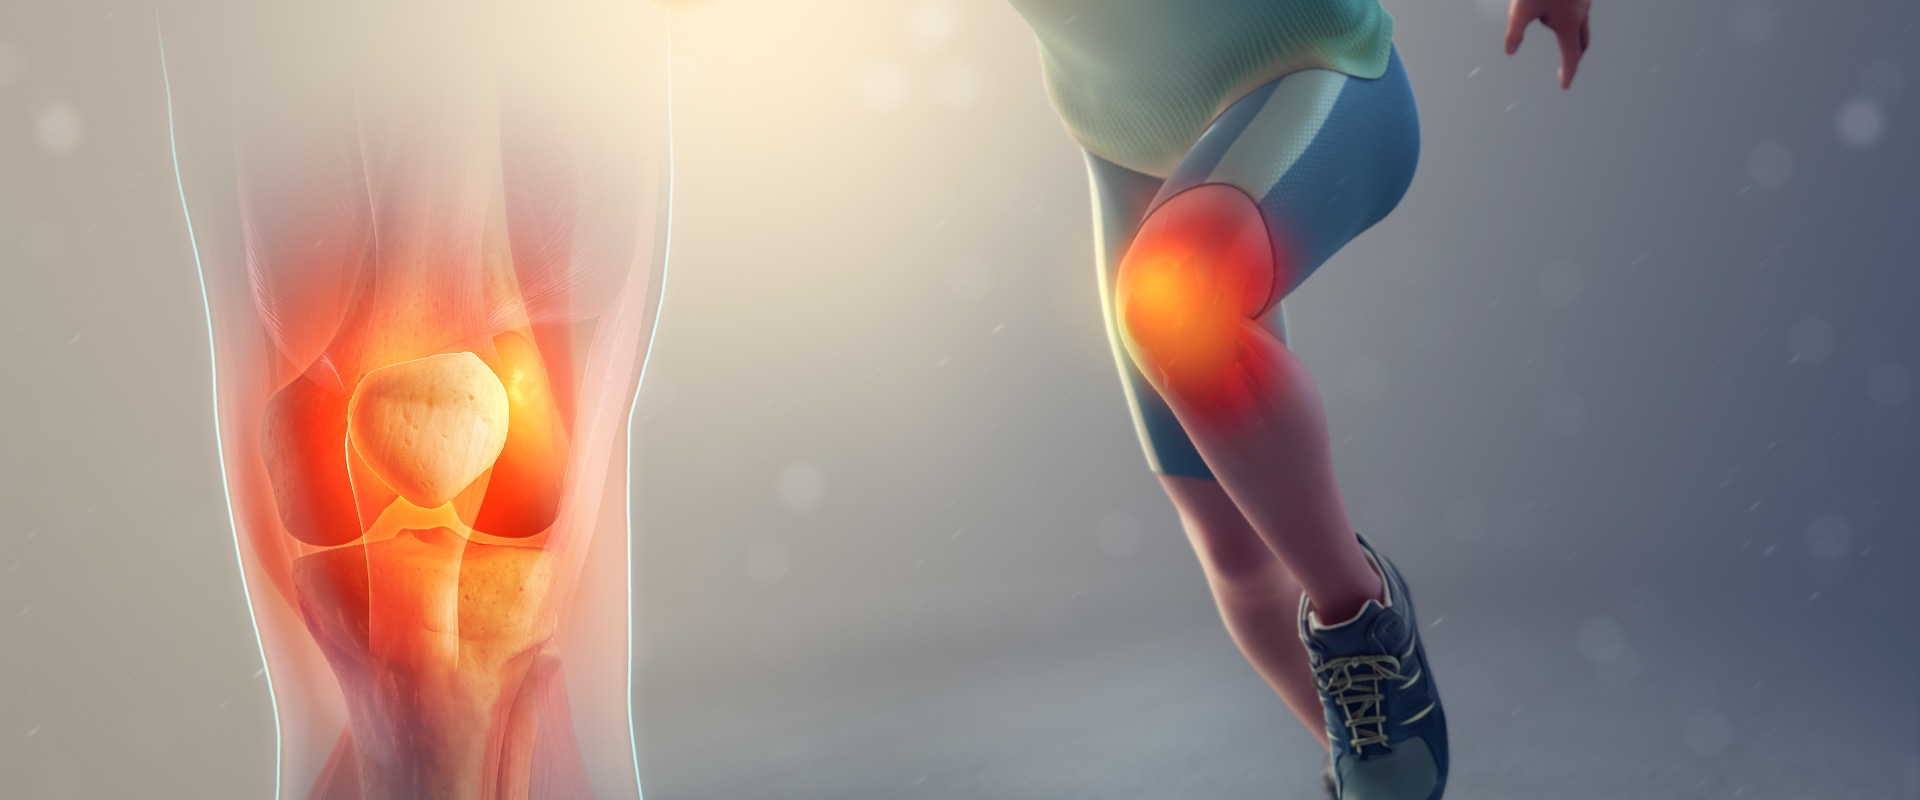 What are the 10 most common injuries?